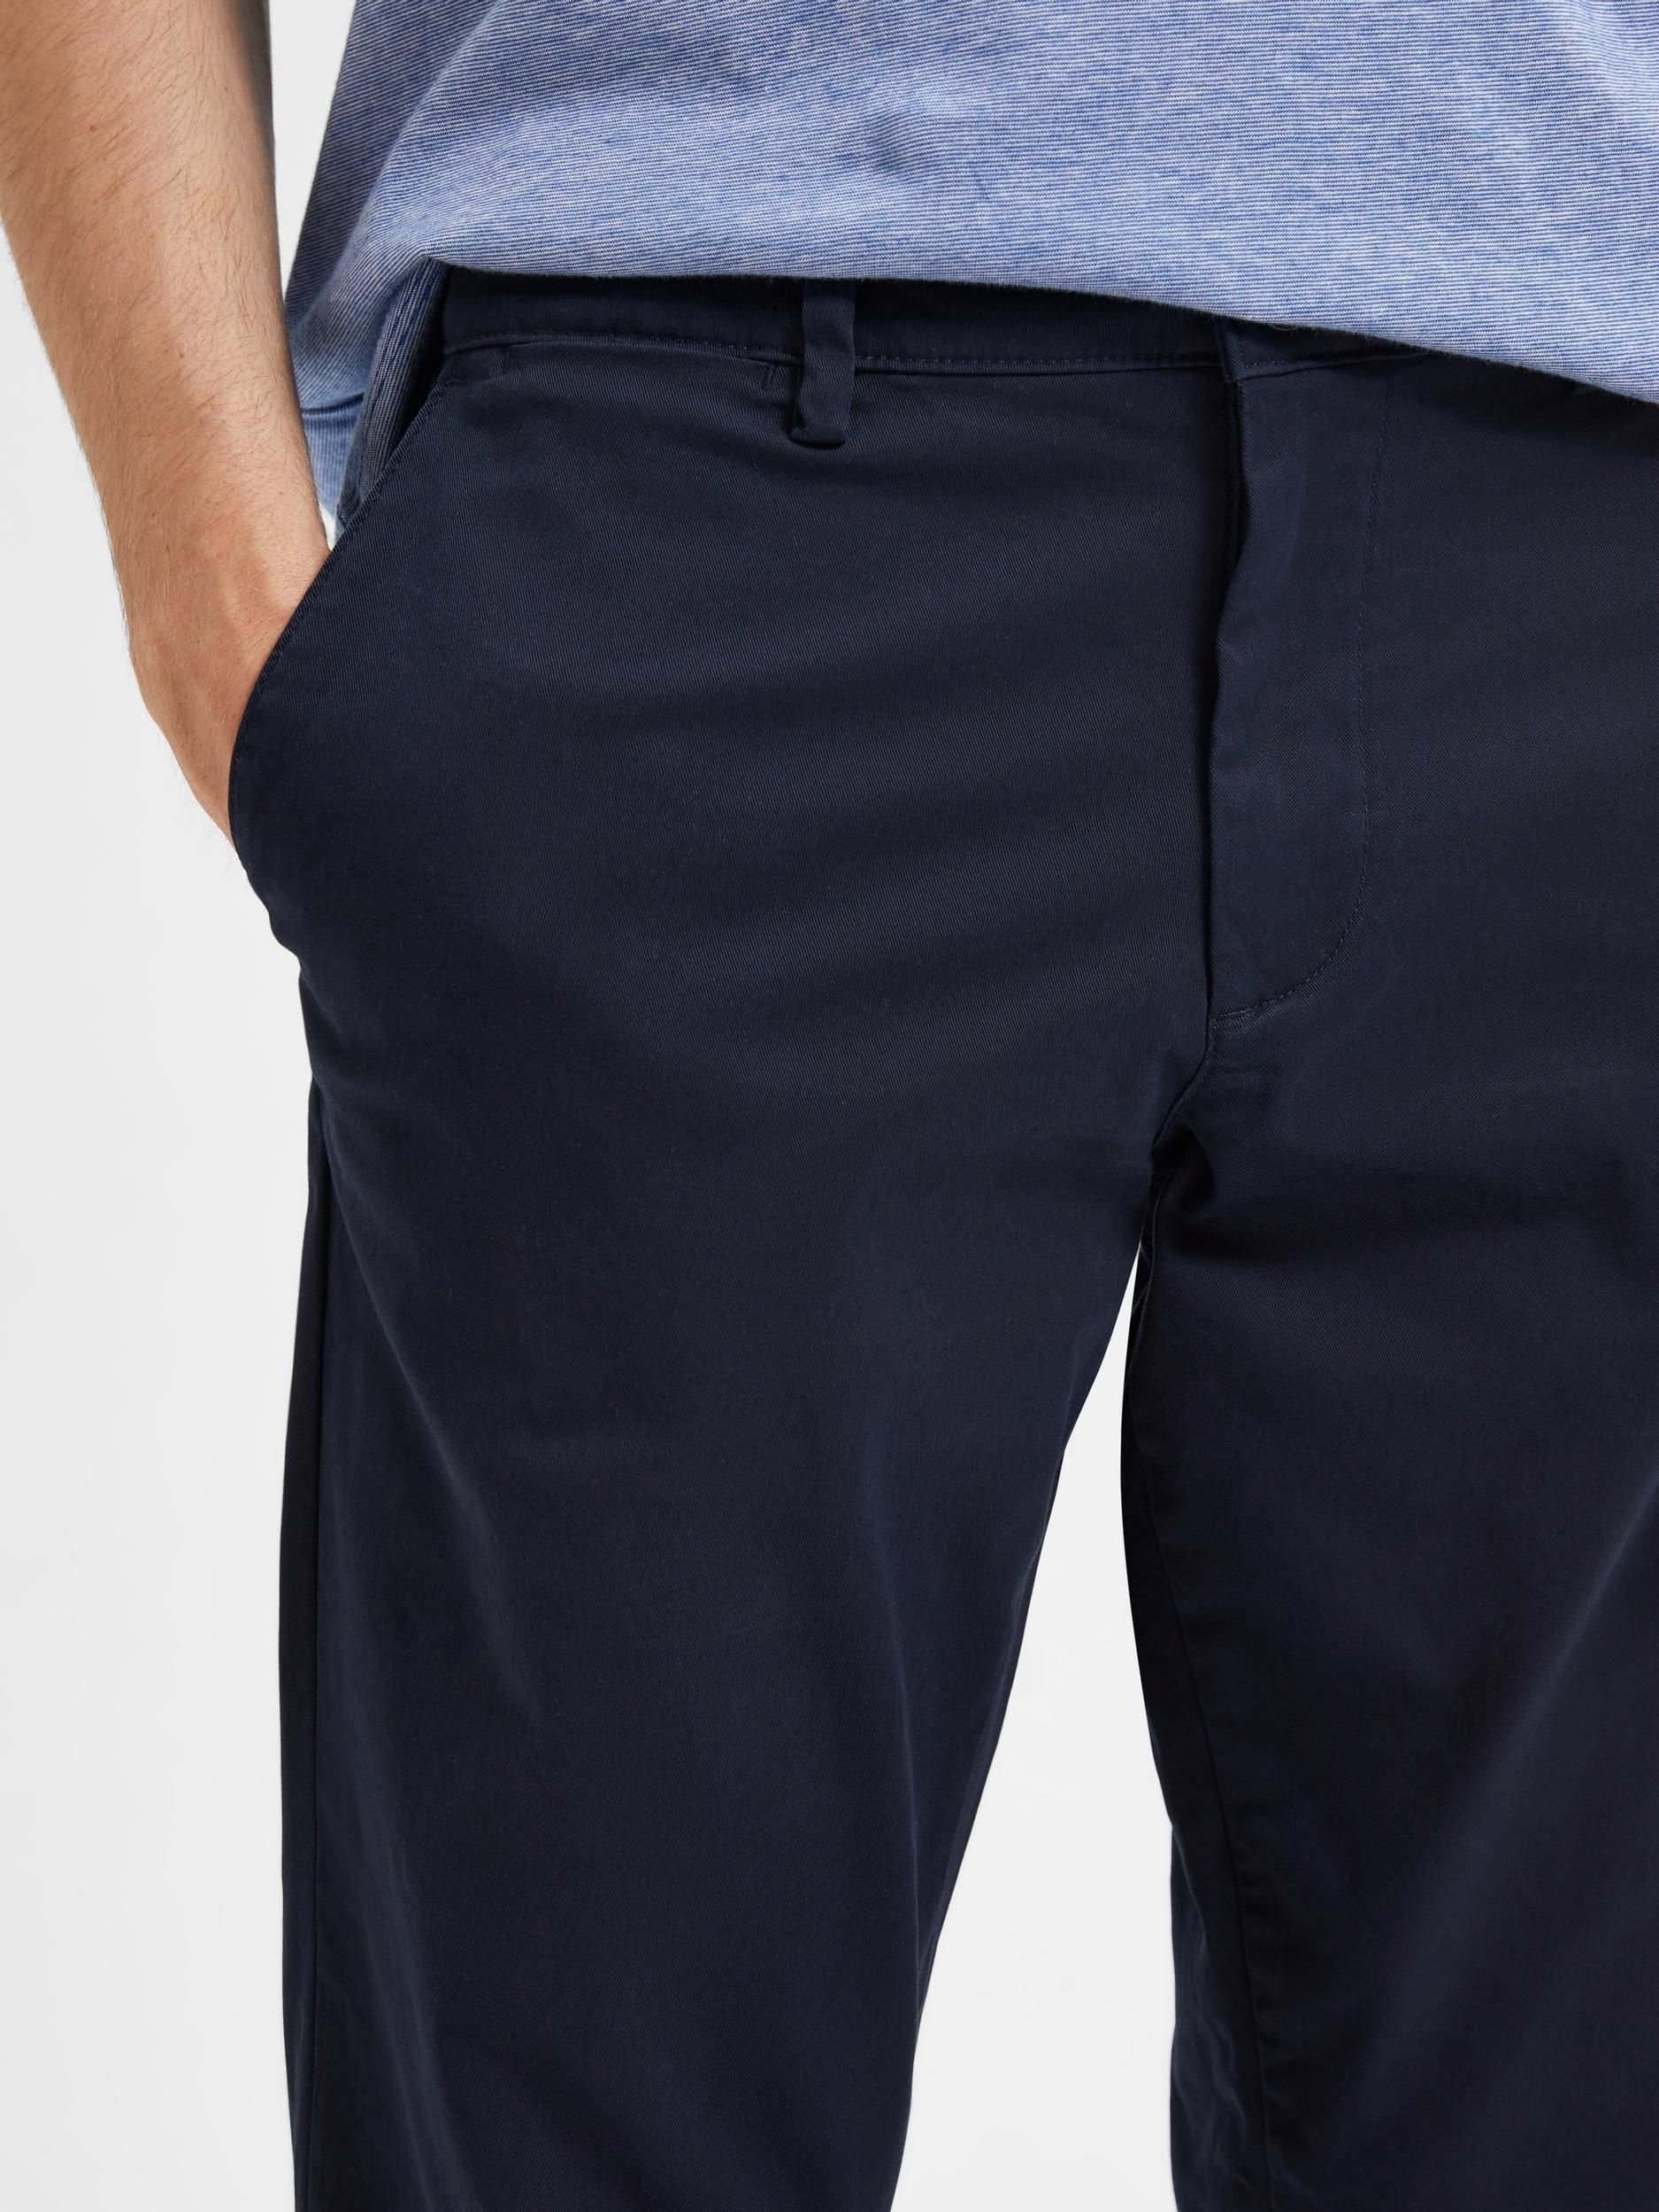 HOMME Chinohose Strech dark sapphire SELECTED